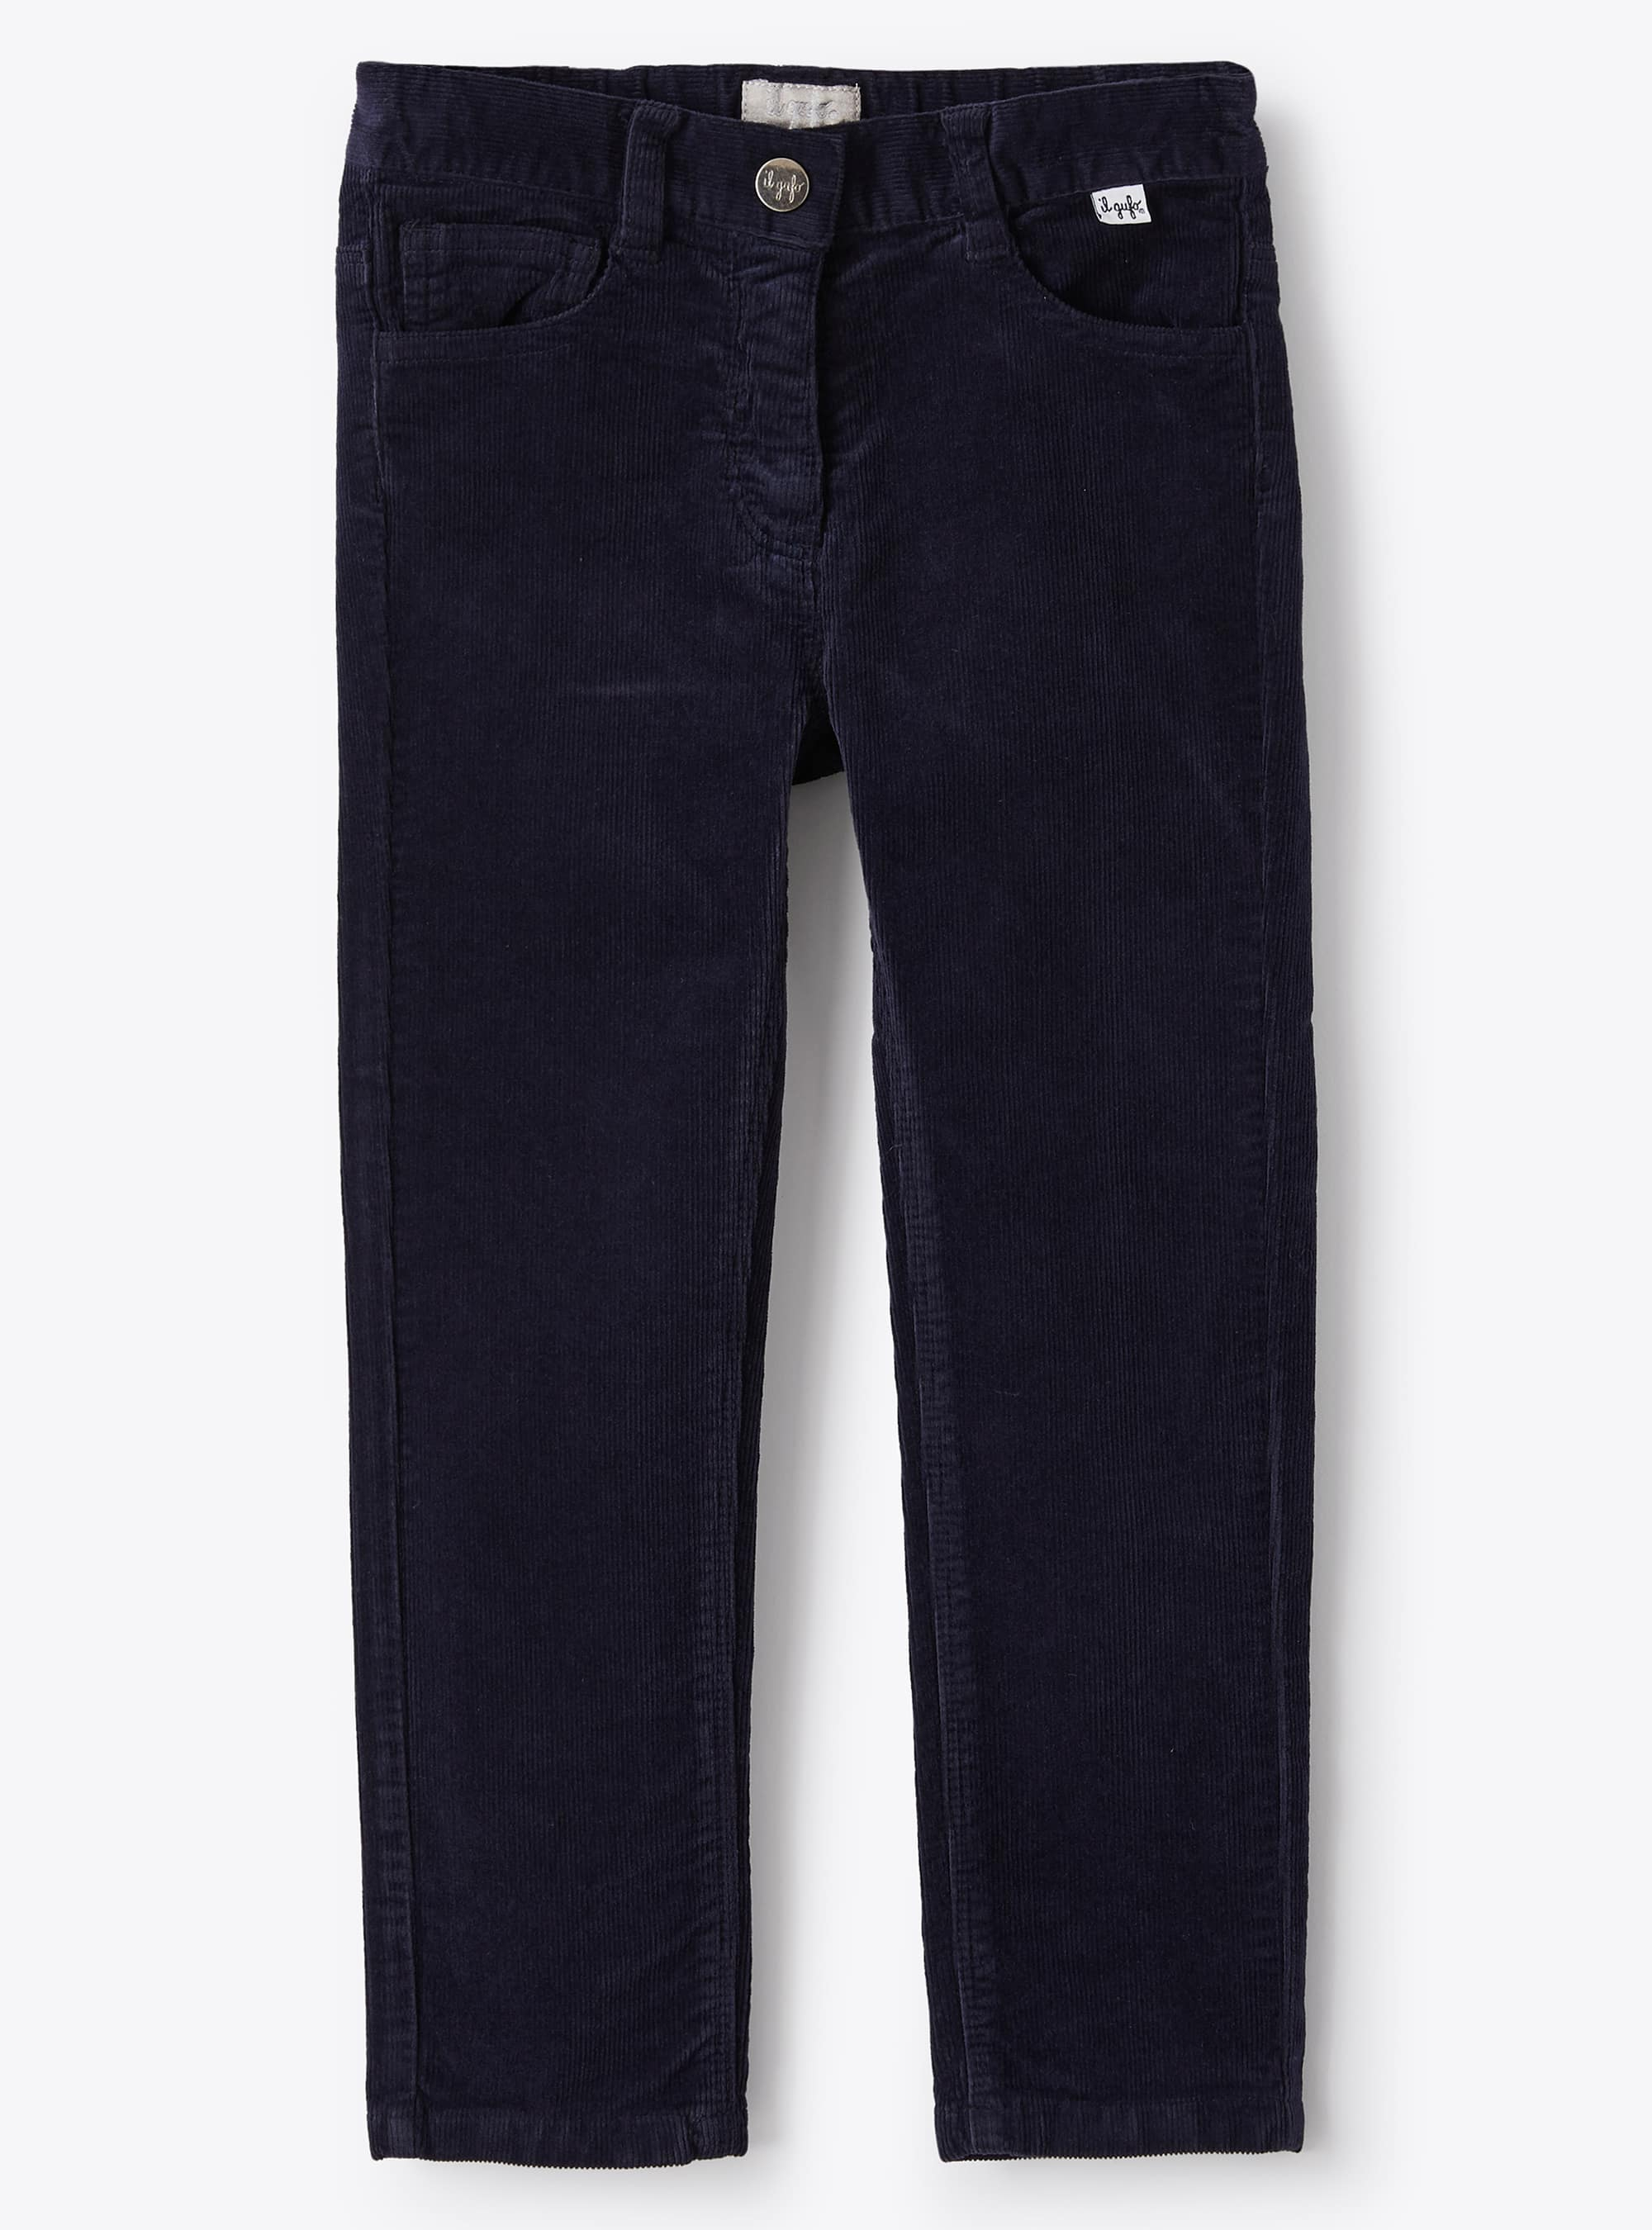 Slim fit navy corduroy trousers - Trousers - Il Gufo